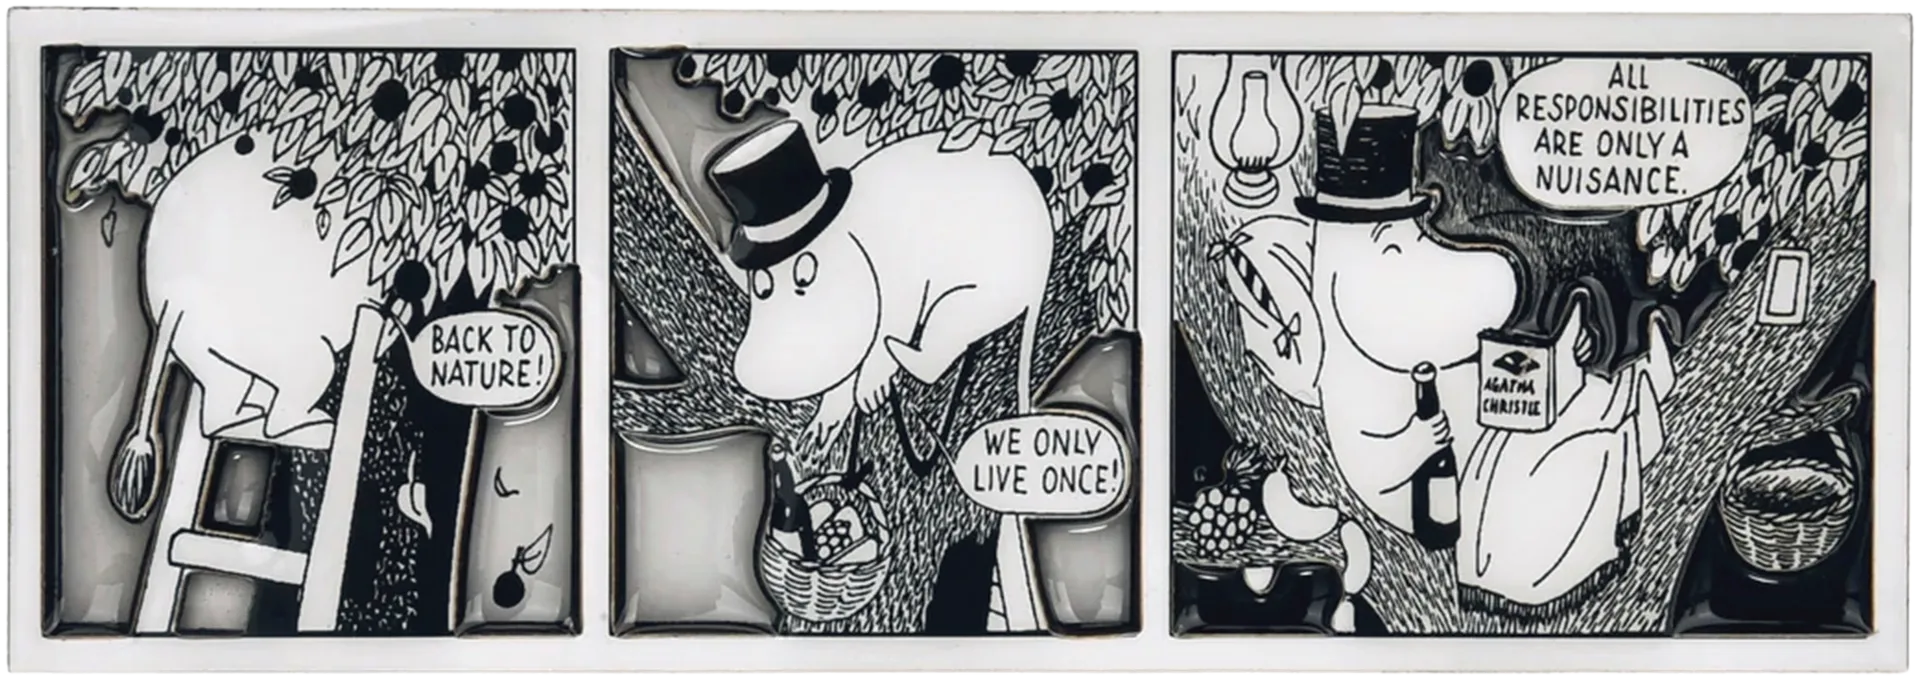 Moomin by Nordicbuddies, Magneetti